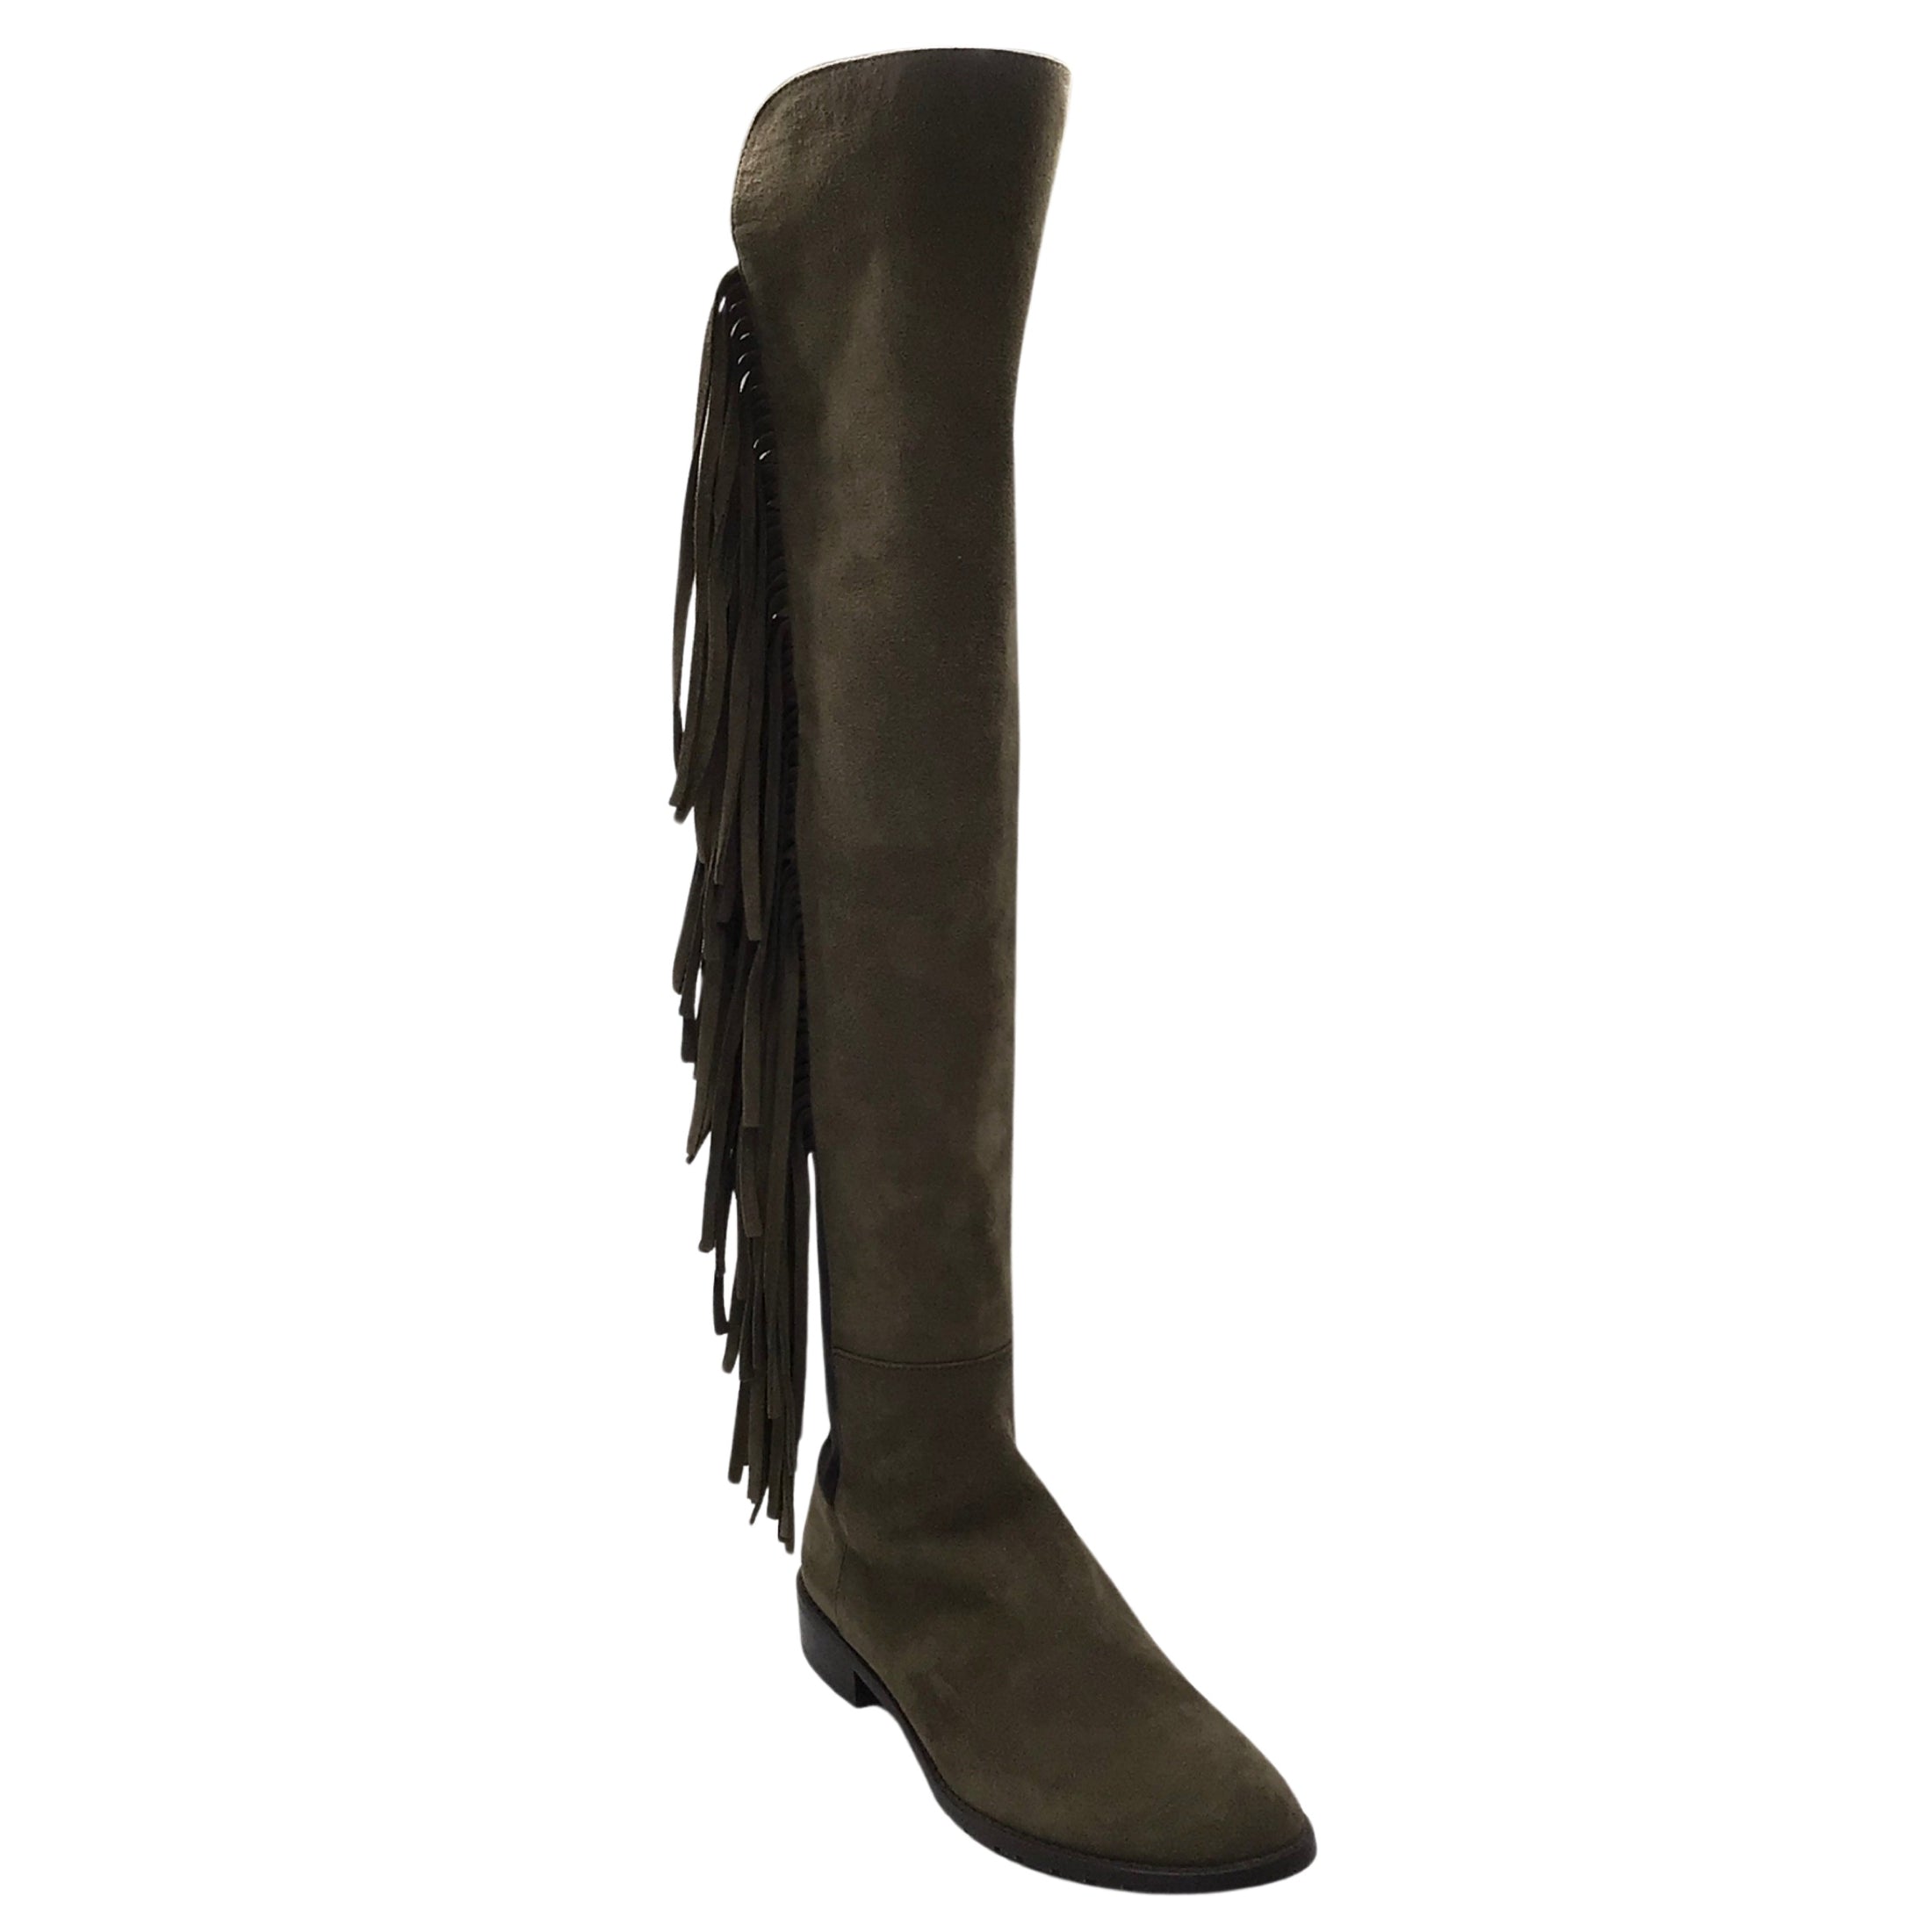 Stuart Weitzman Olive Green / Black Fringed Pull-On Knee-High Suede Leather Boots